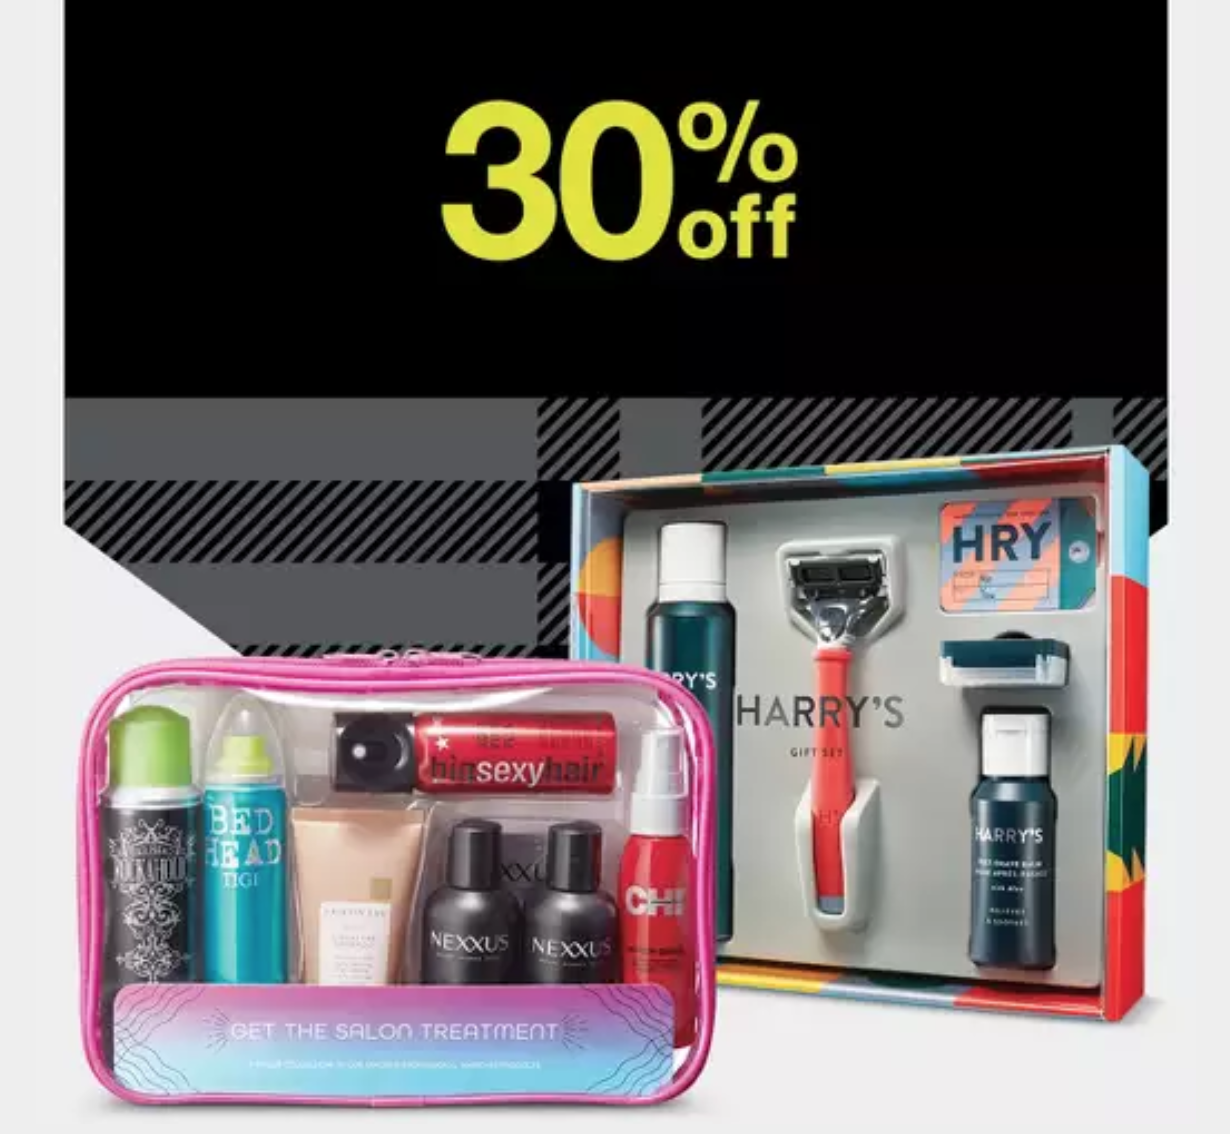 Target Black Friday Sale – 30% Off All Beauty Kits!